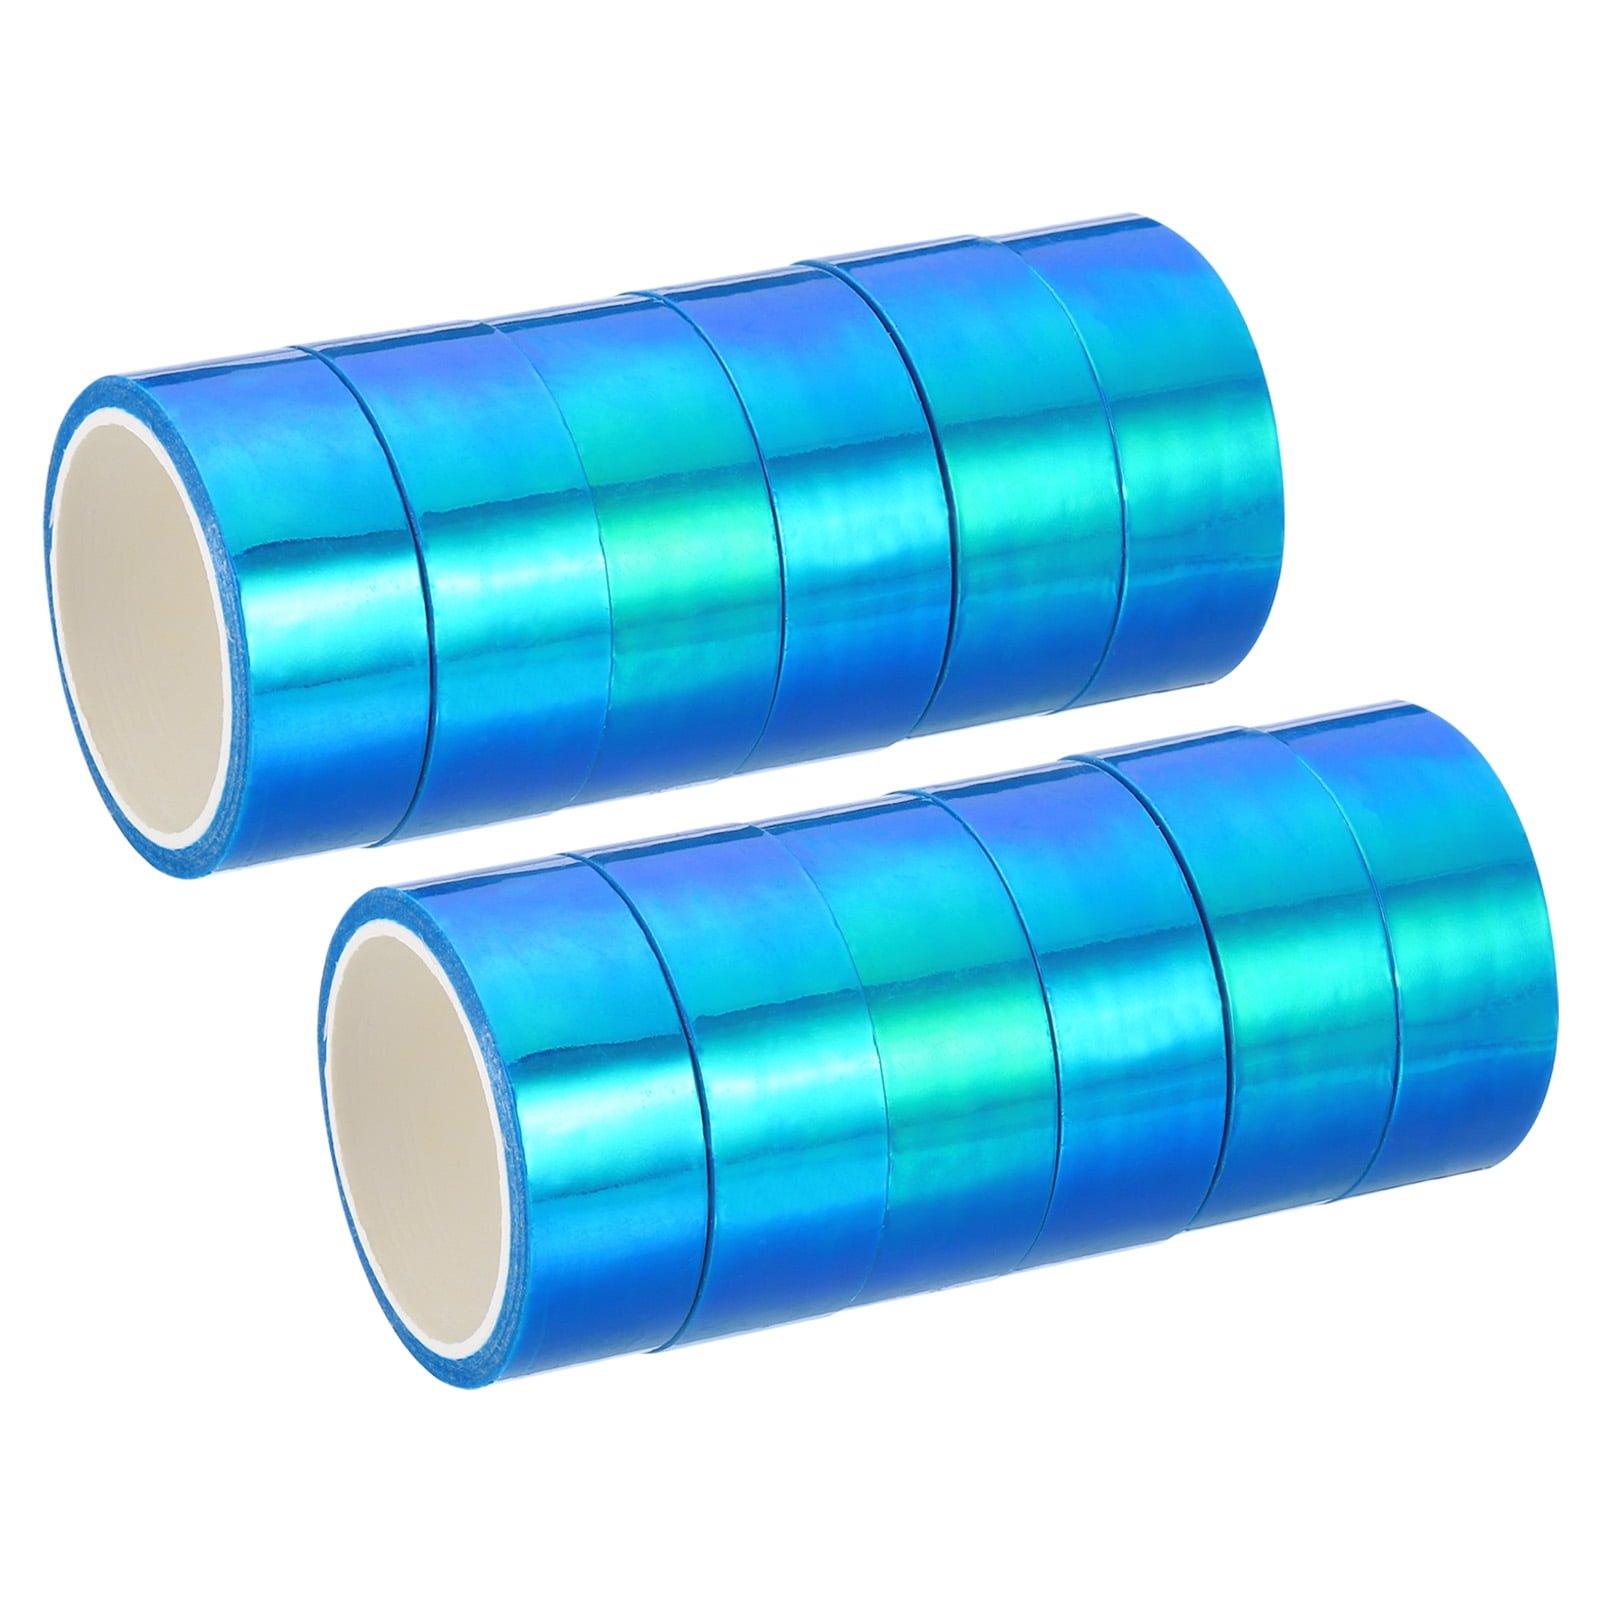 Uxcell 15mmx5m Holographic Tape Adhesive Metallic Foil Masking Sticker,  Blue 12 Roll